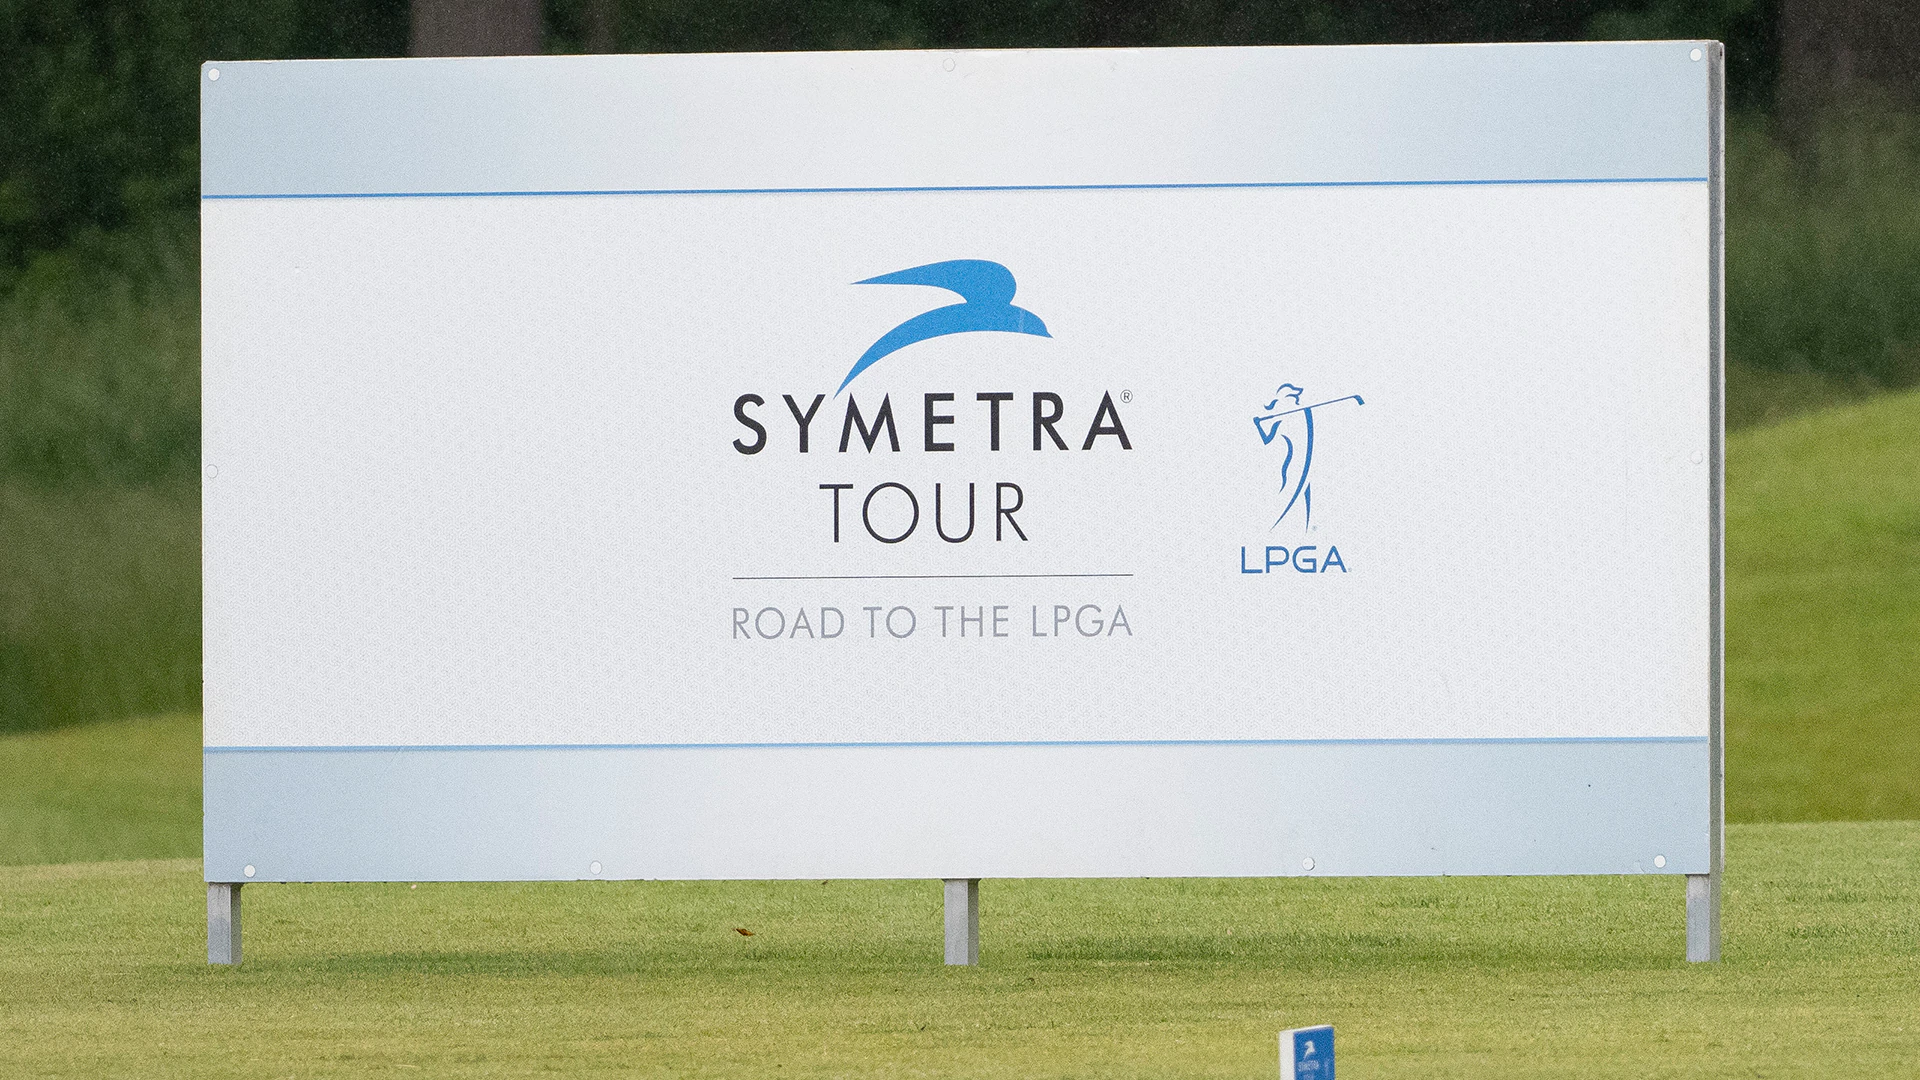 Symetra Tour cancels two July events, further delaying its restart